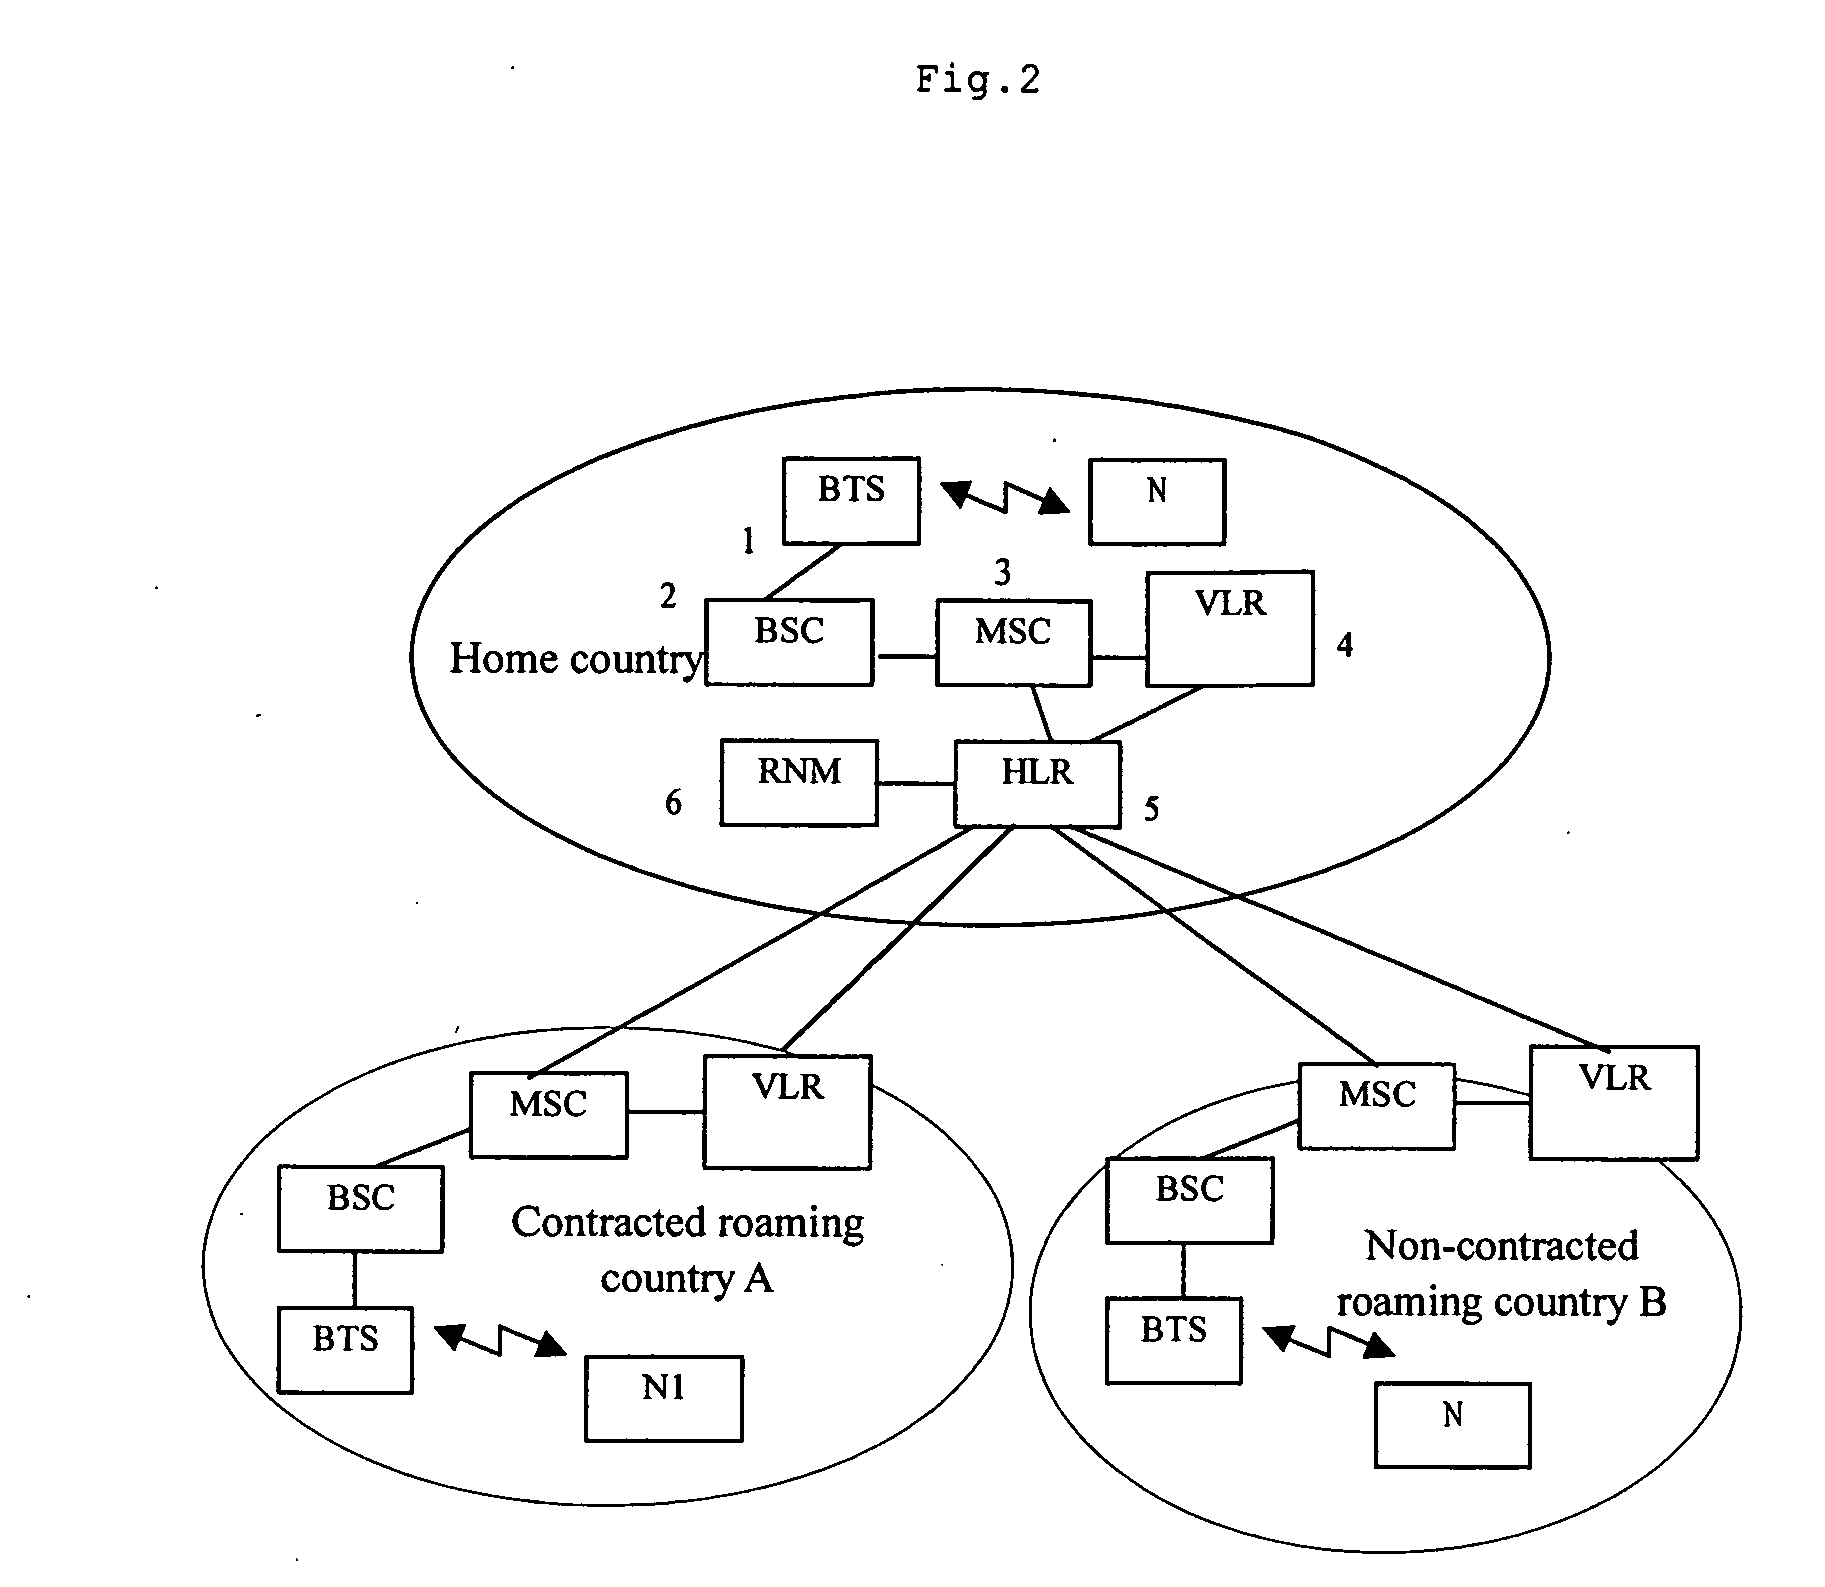 Network and method of realizing local roaming for subscribers